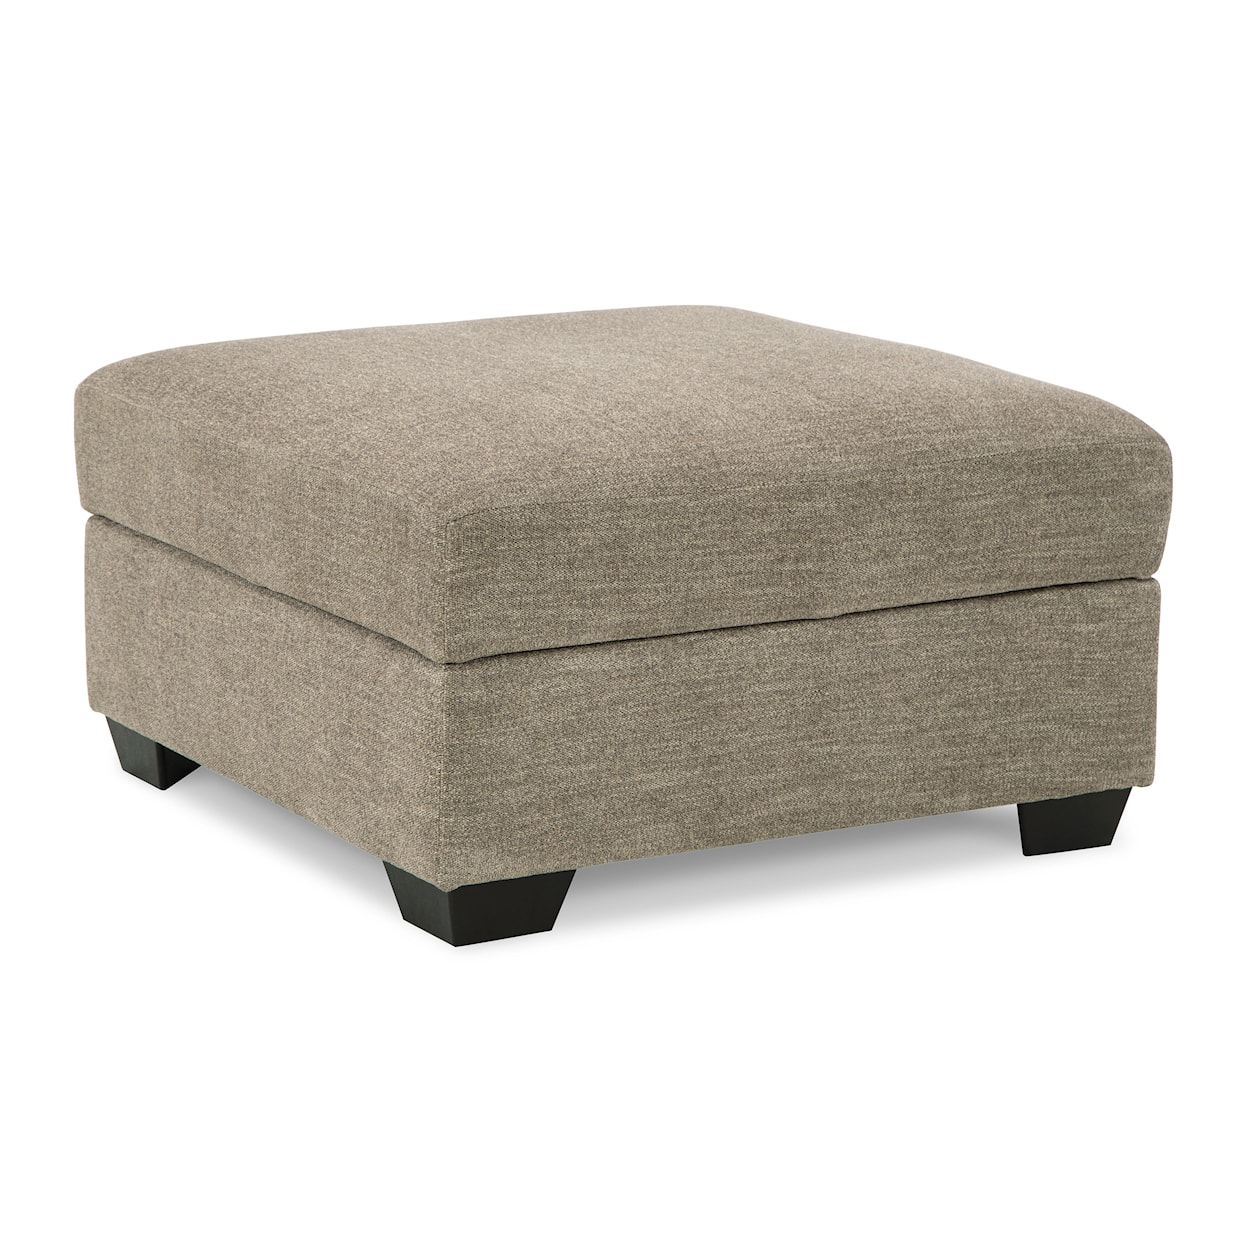 Benchcraft Creswell Ottoman With Storage